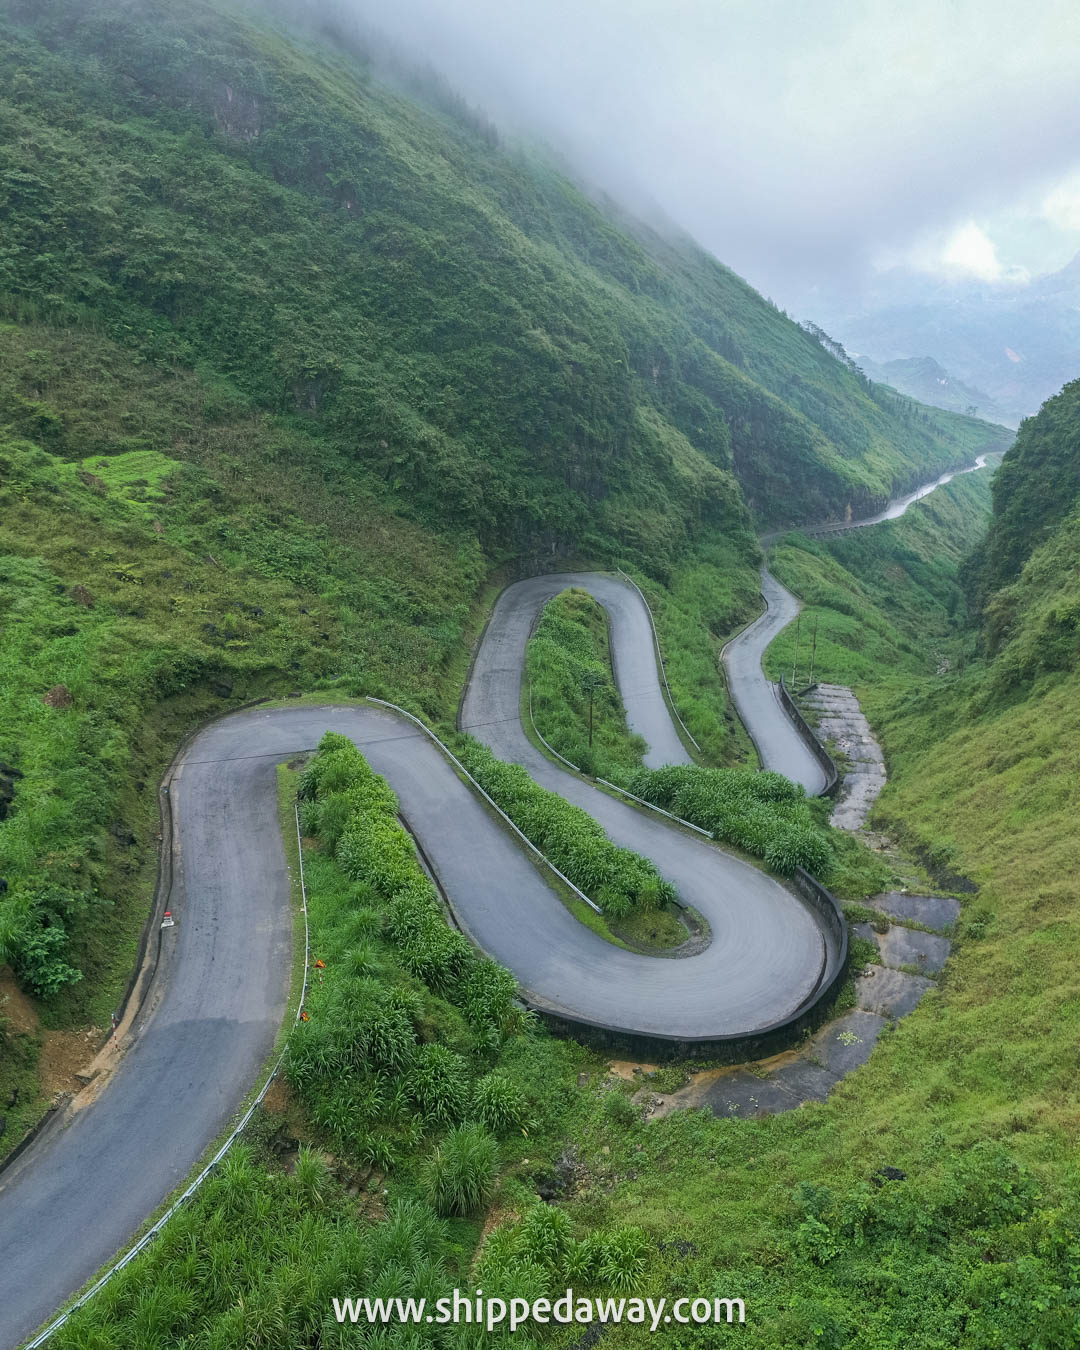 renting a motorbike for the ha giang loop, ha giang loop vietnam, ha giang loop guide, ha giang loop for beginners, riding the ha giang loop independently, ha giang loop with easy riders, tham ma pass